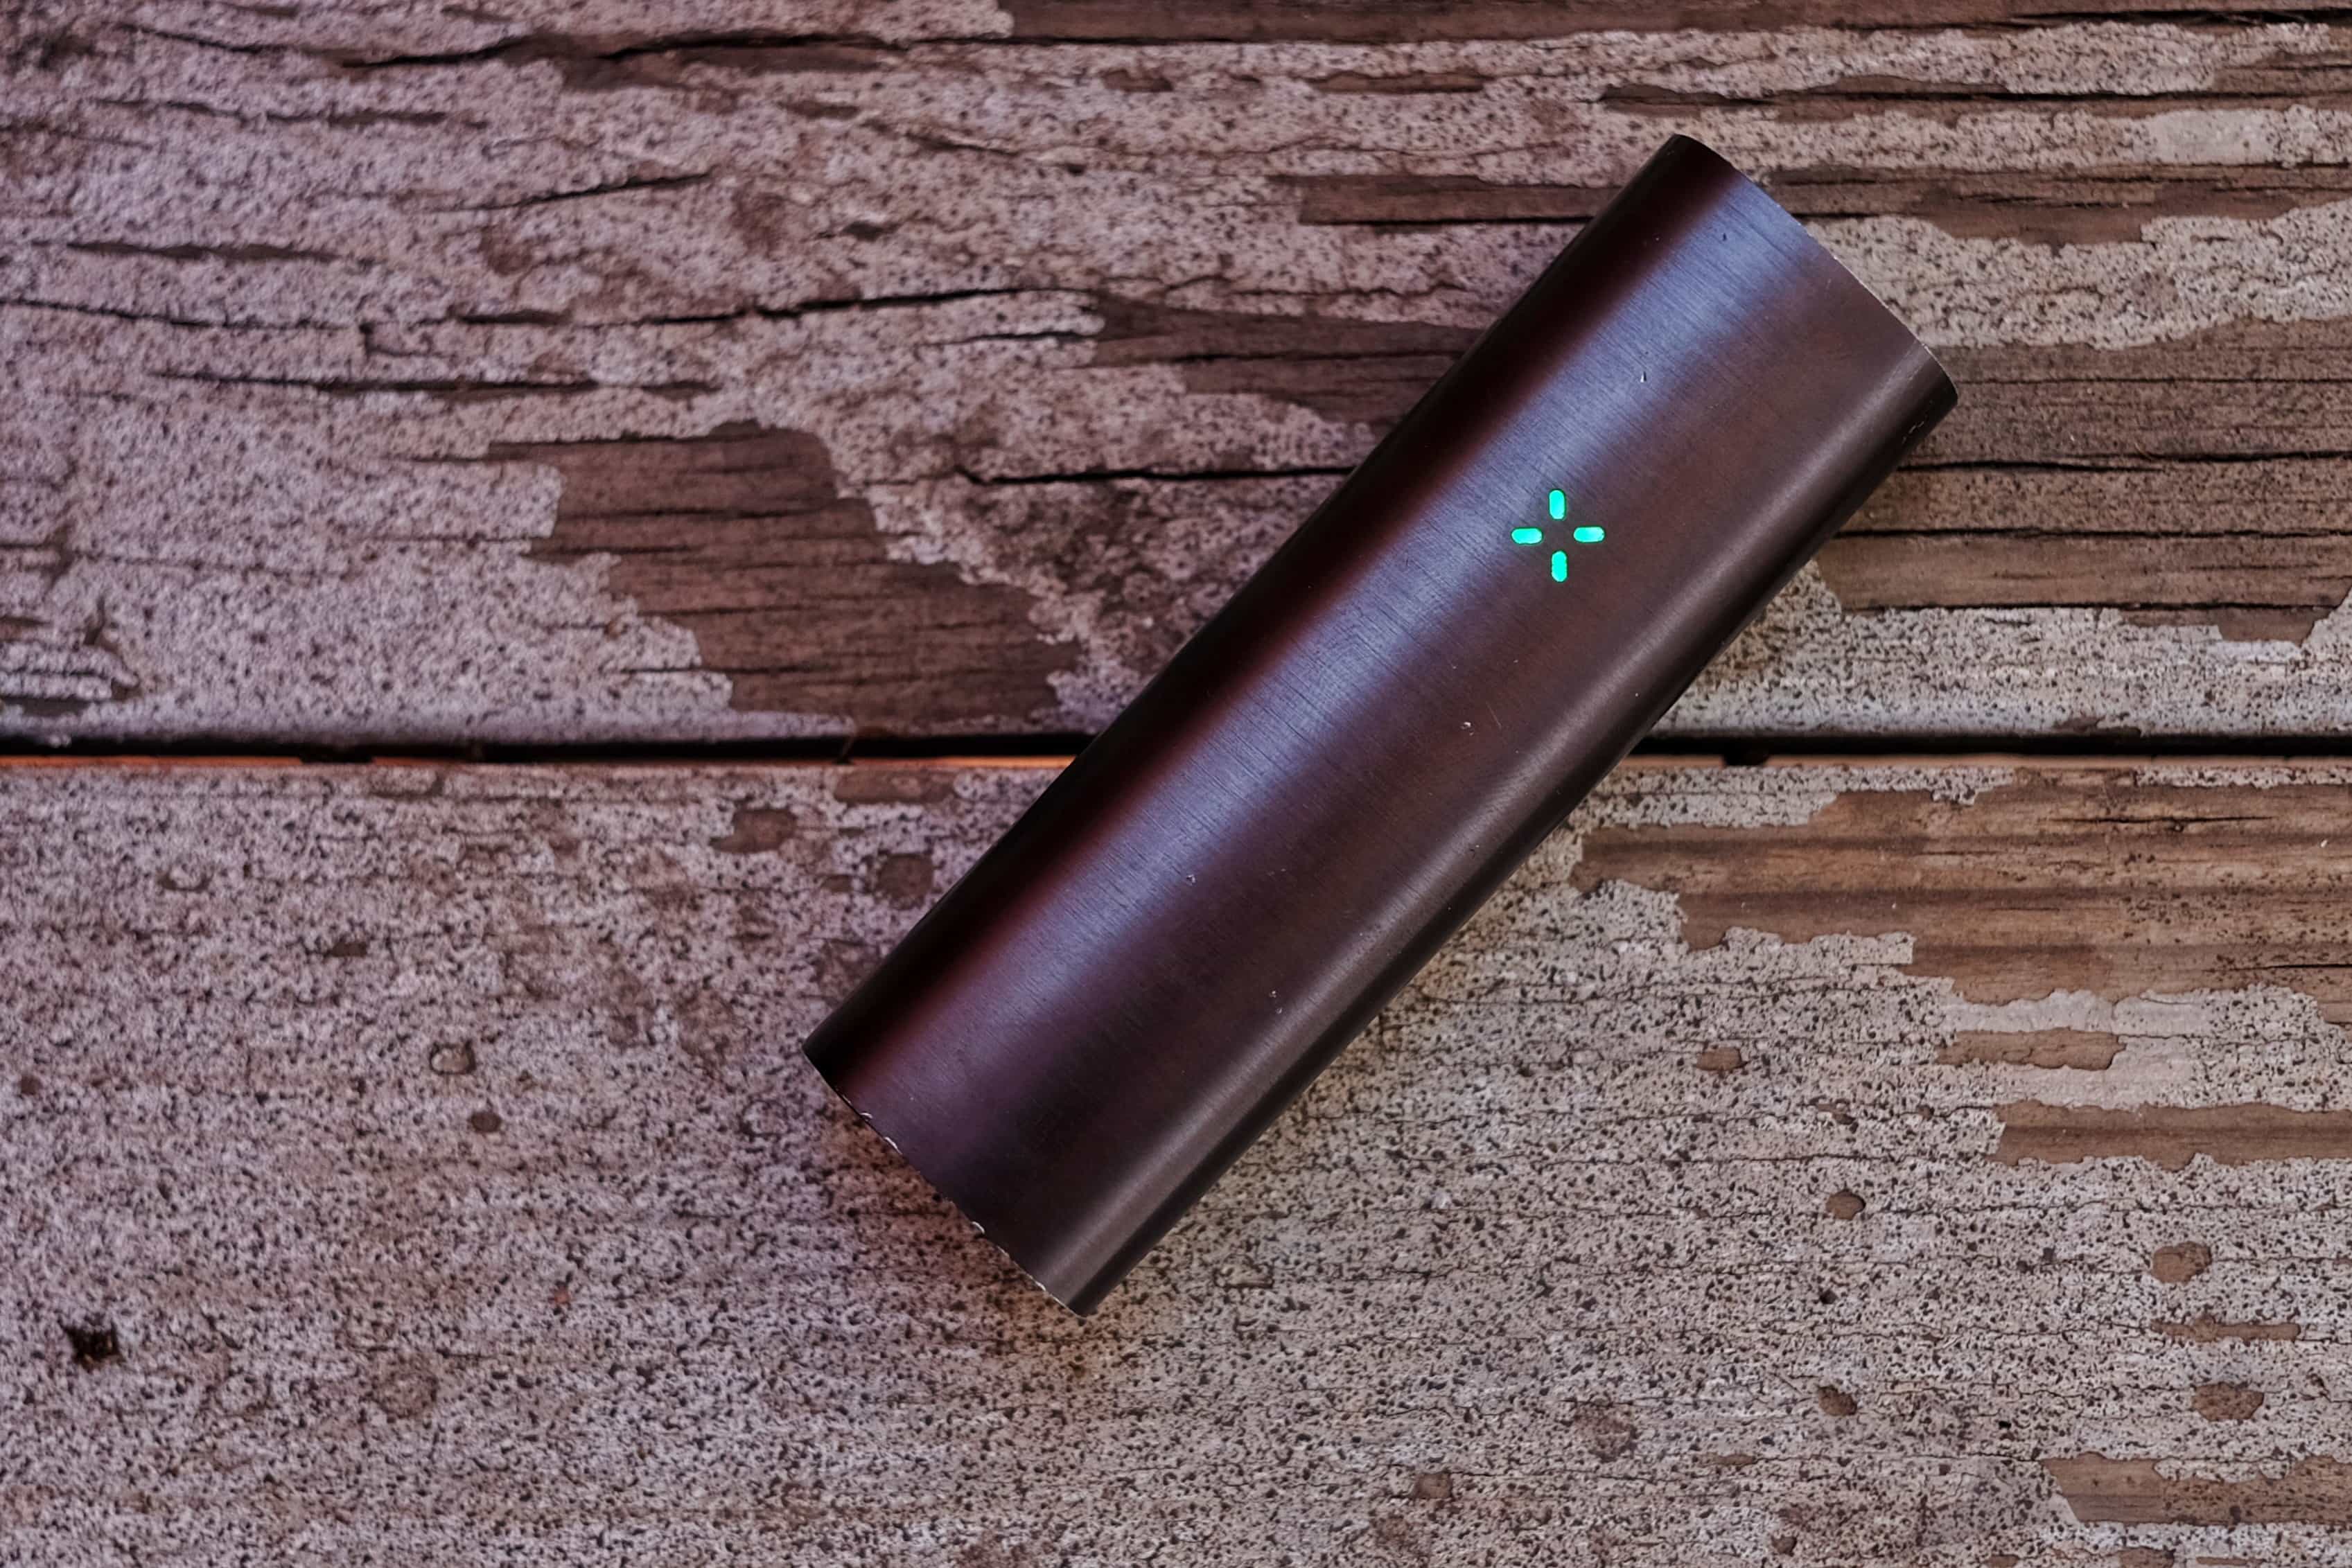 The Pax 2 is so simple any toker can use it.